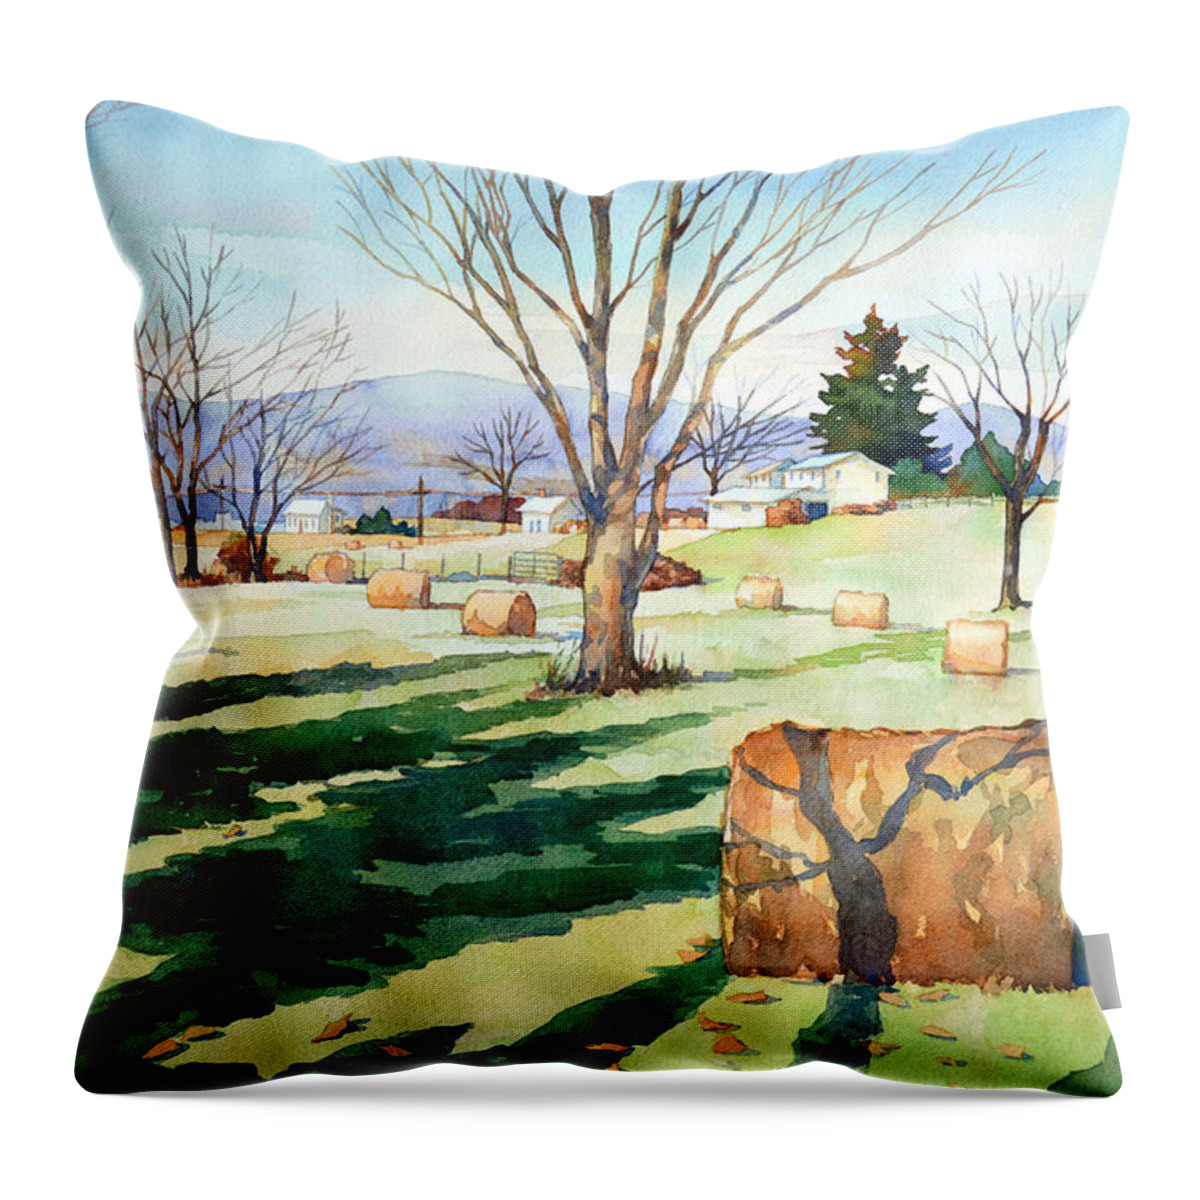 Watercolor Throw Pillow featuring the painting Morning Sun on Haybales by Mick Williams